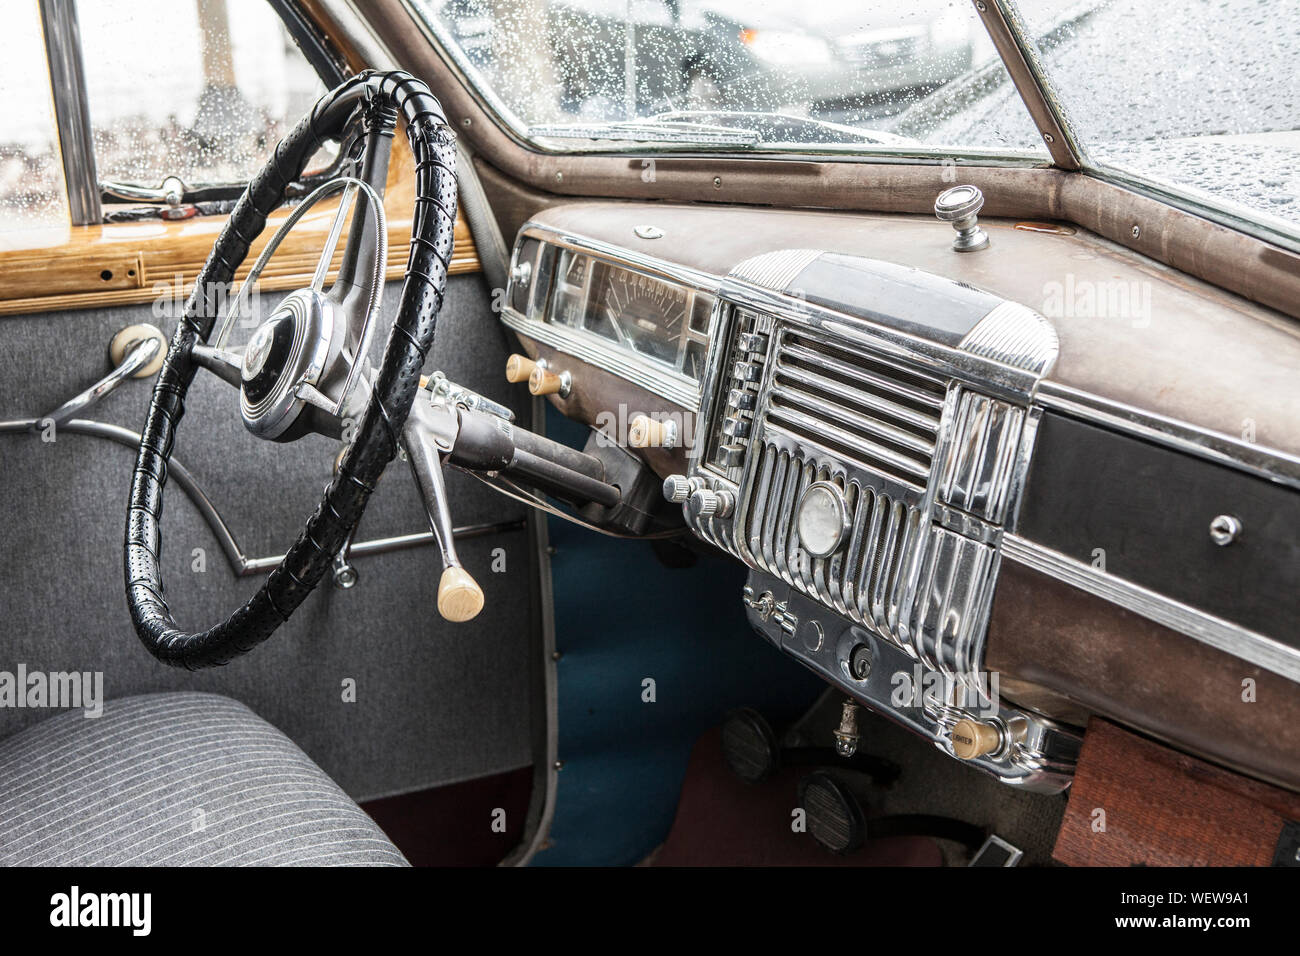 Interior Of Classic 1940s Car WEW9A1 